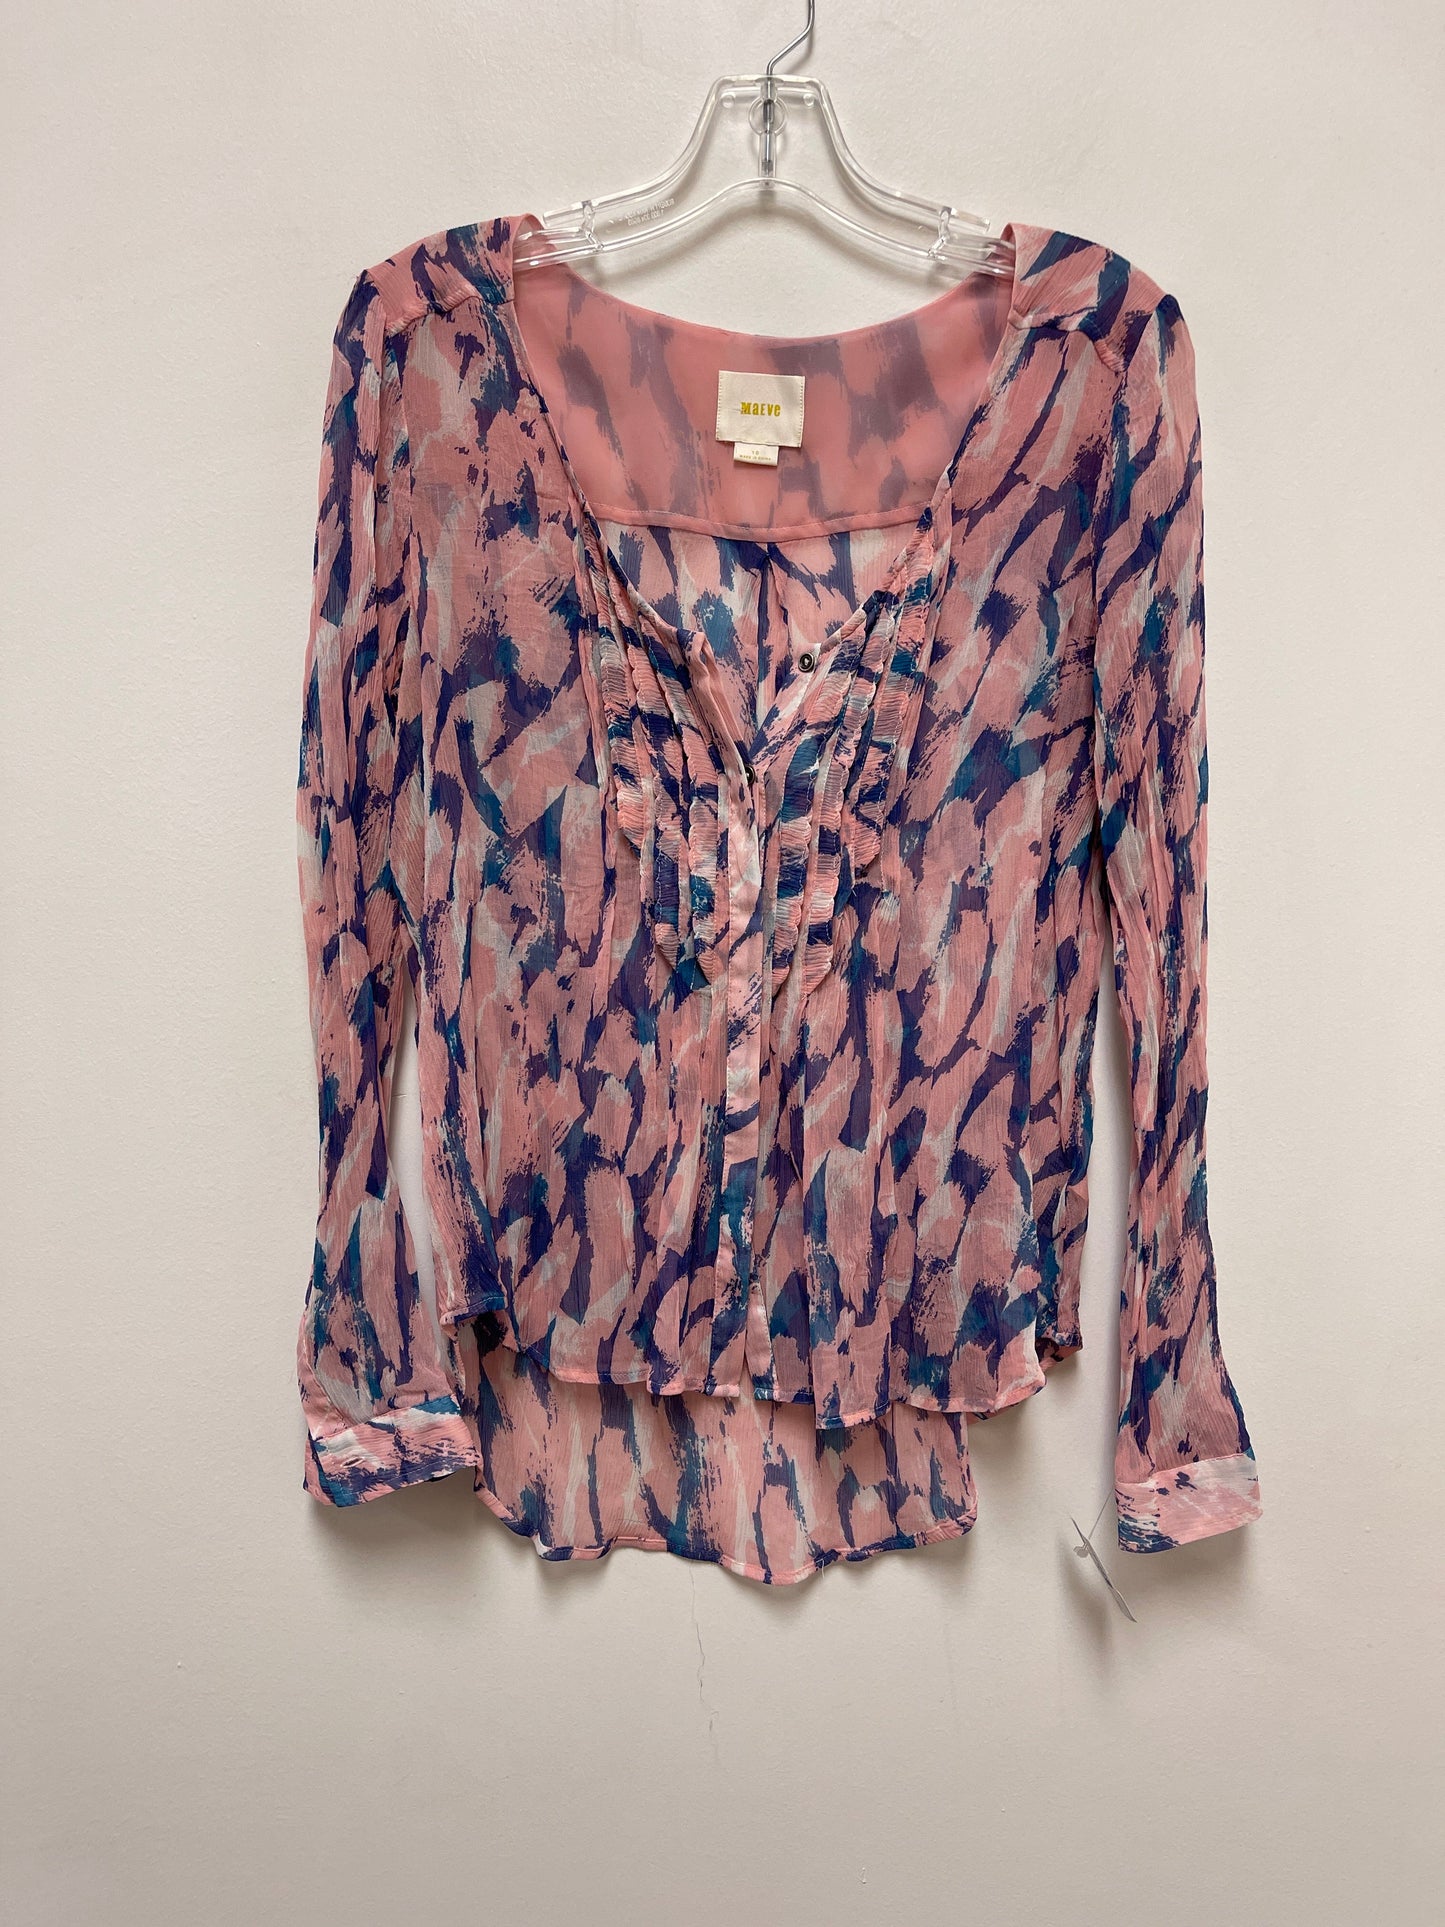 Blue & Pink Top Long Sleeve Maeve, Size M